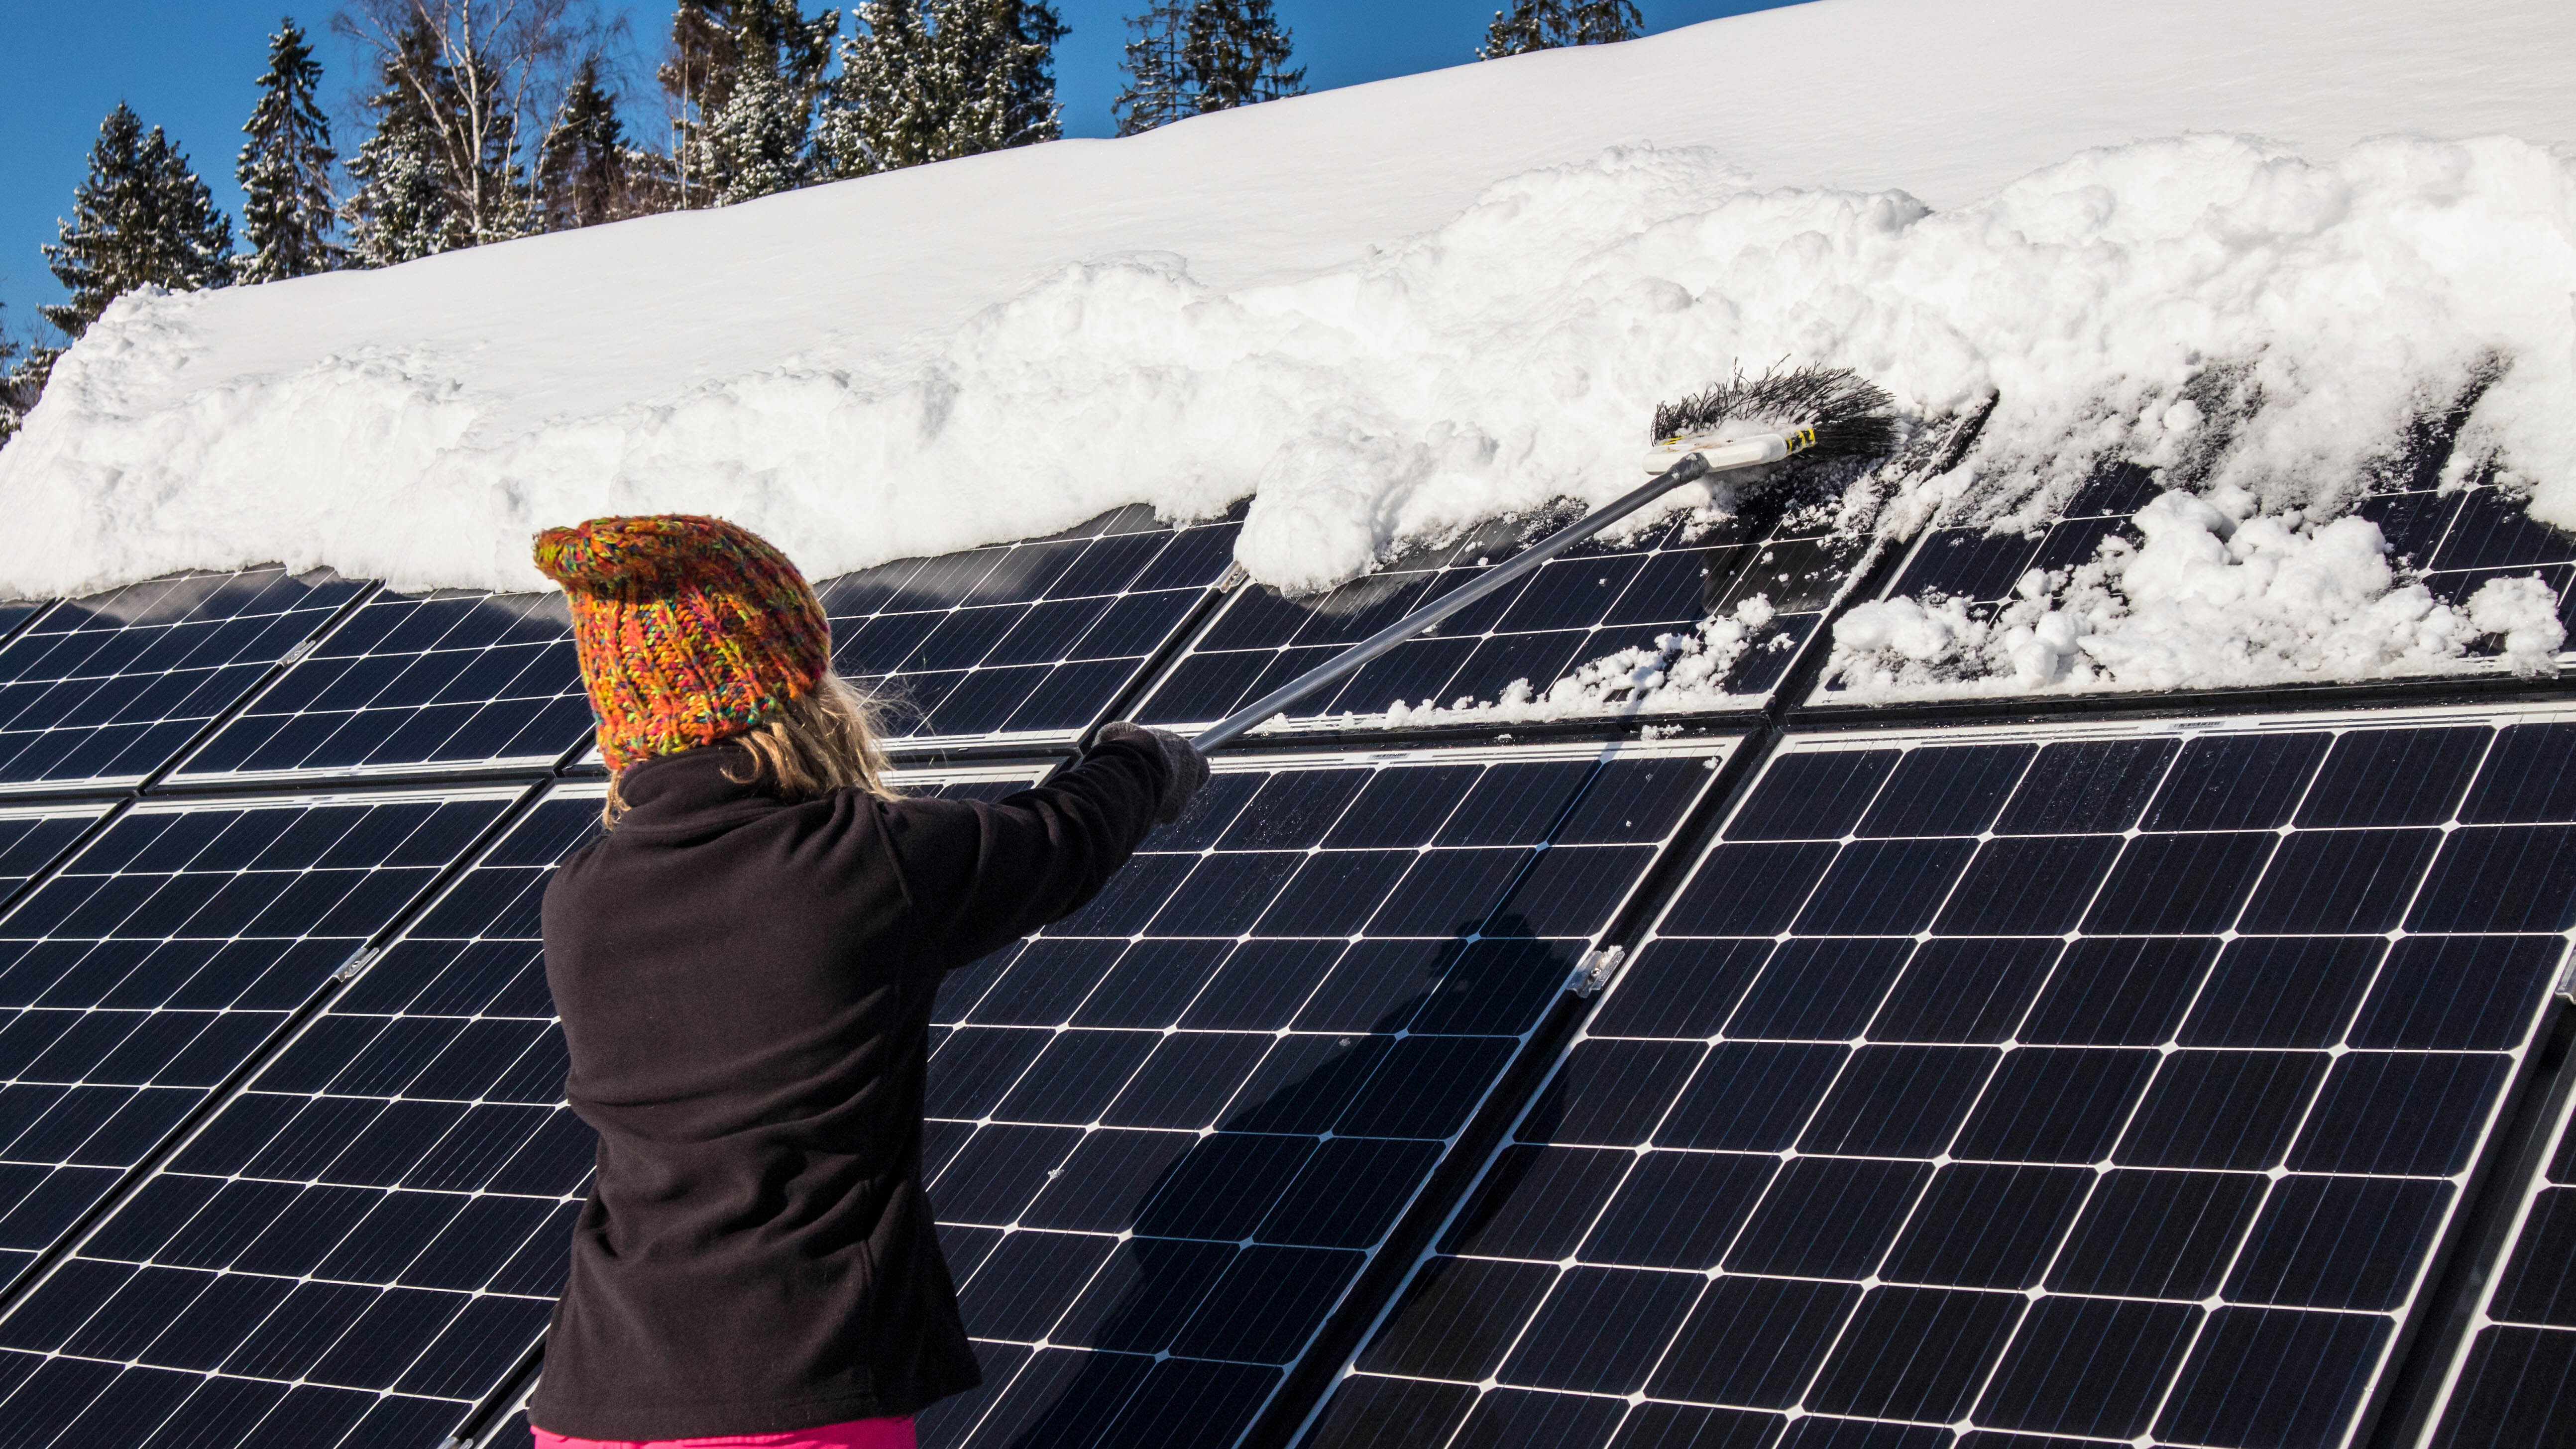 How to Keep Your Solar Panels Running During Winter Weather - CNET